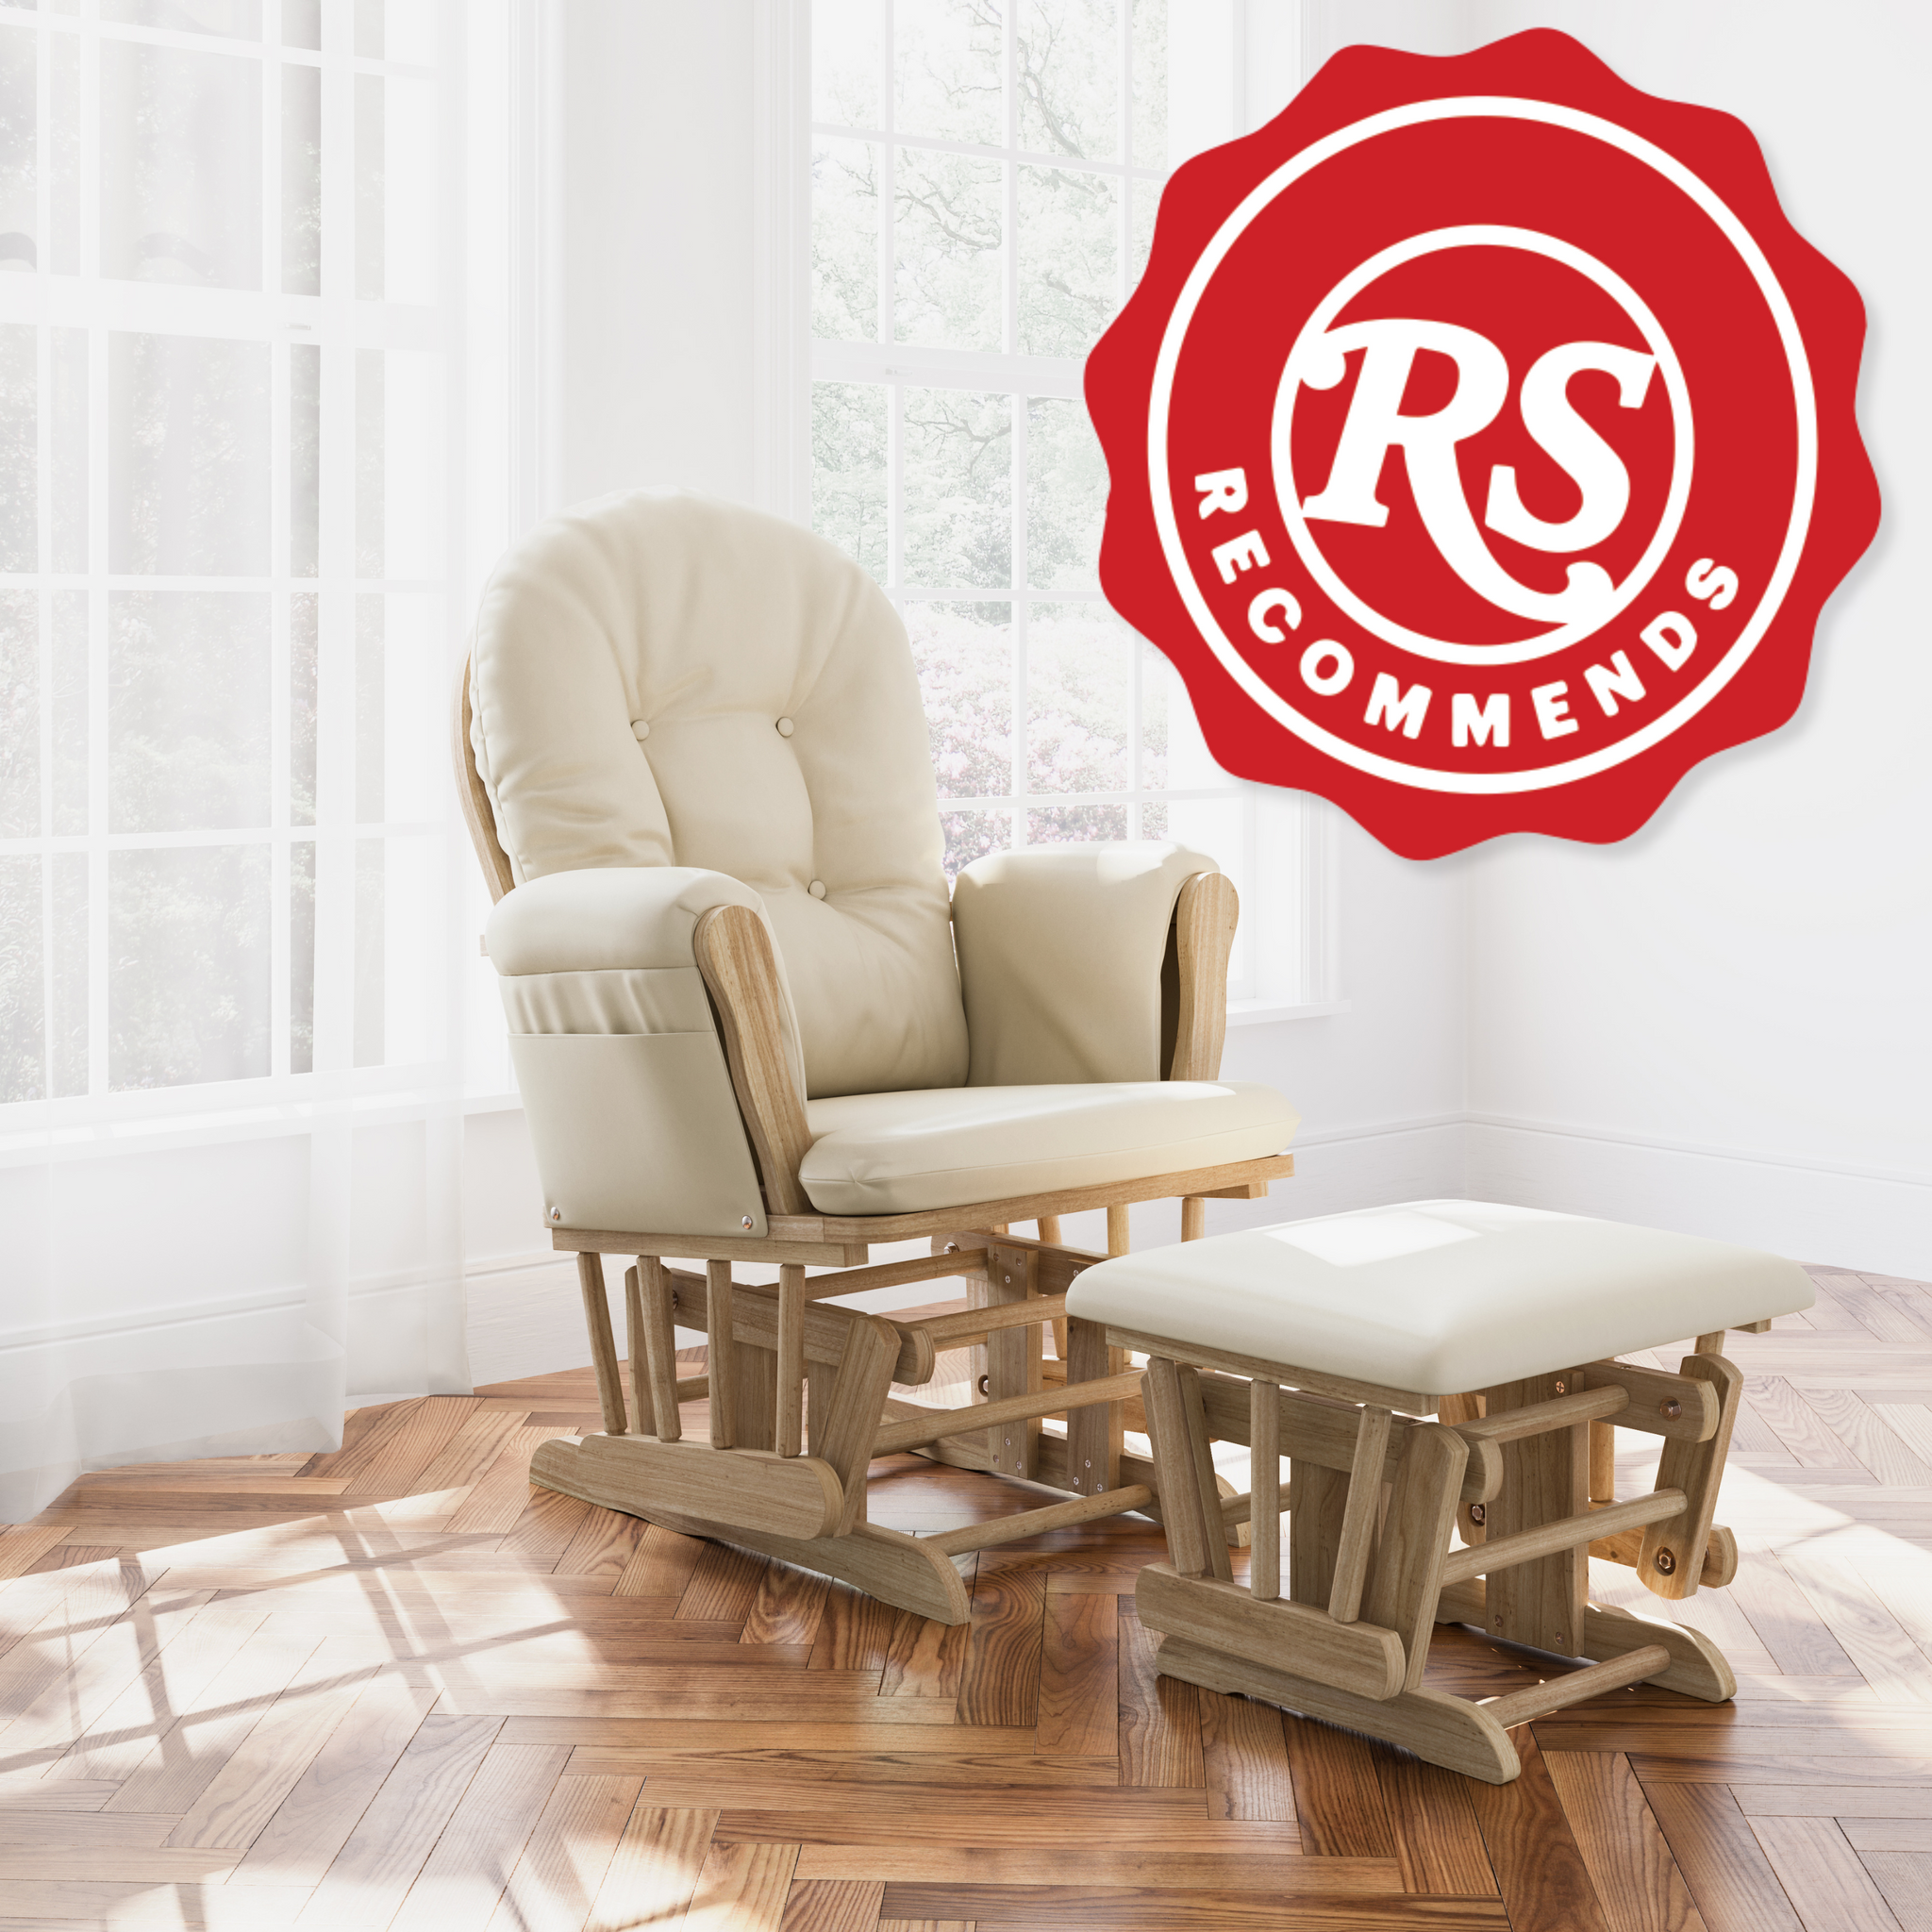 Wood nursery glider and ottoman with beige cushions in a room, with red badge that reads RS RECOMMENDS in white text